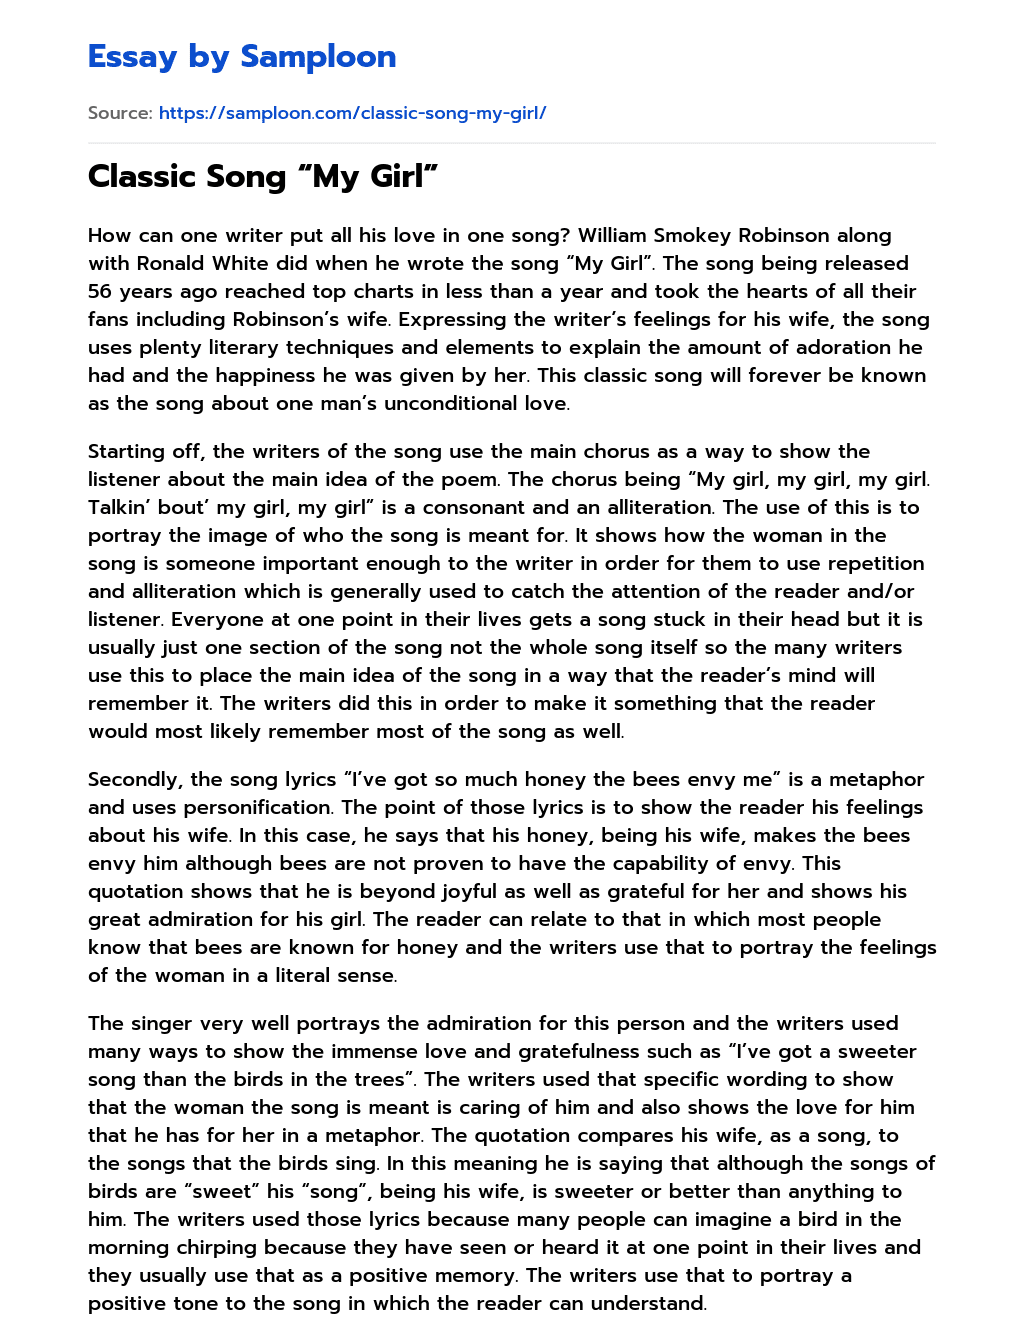 Classic Song “My Girl” essay